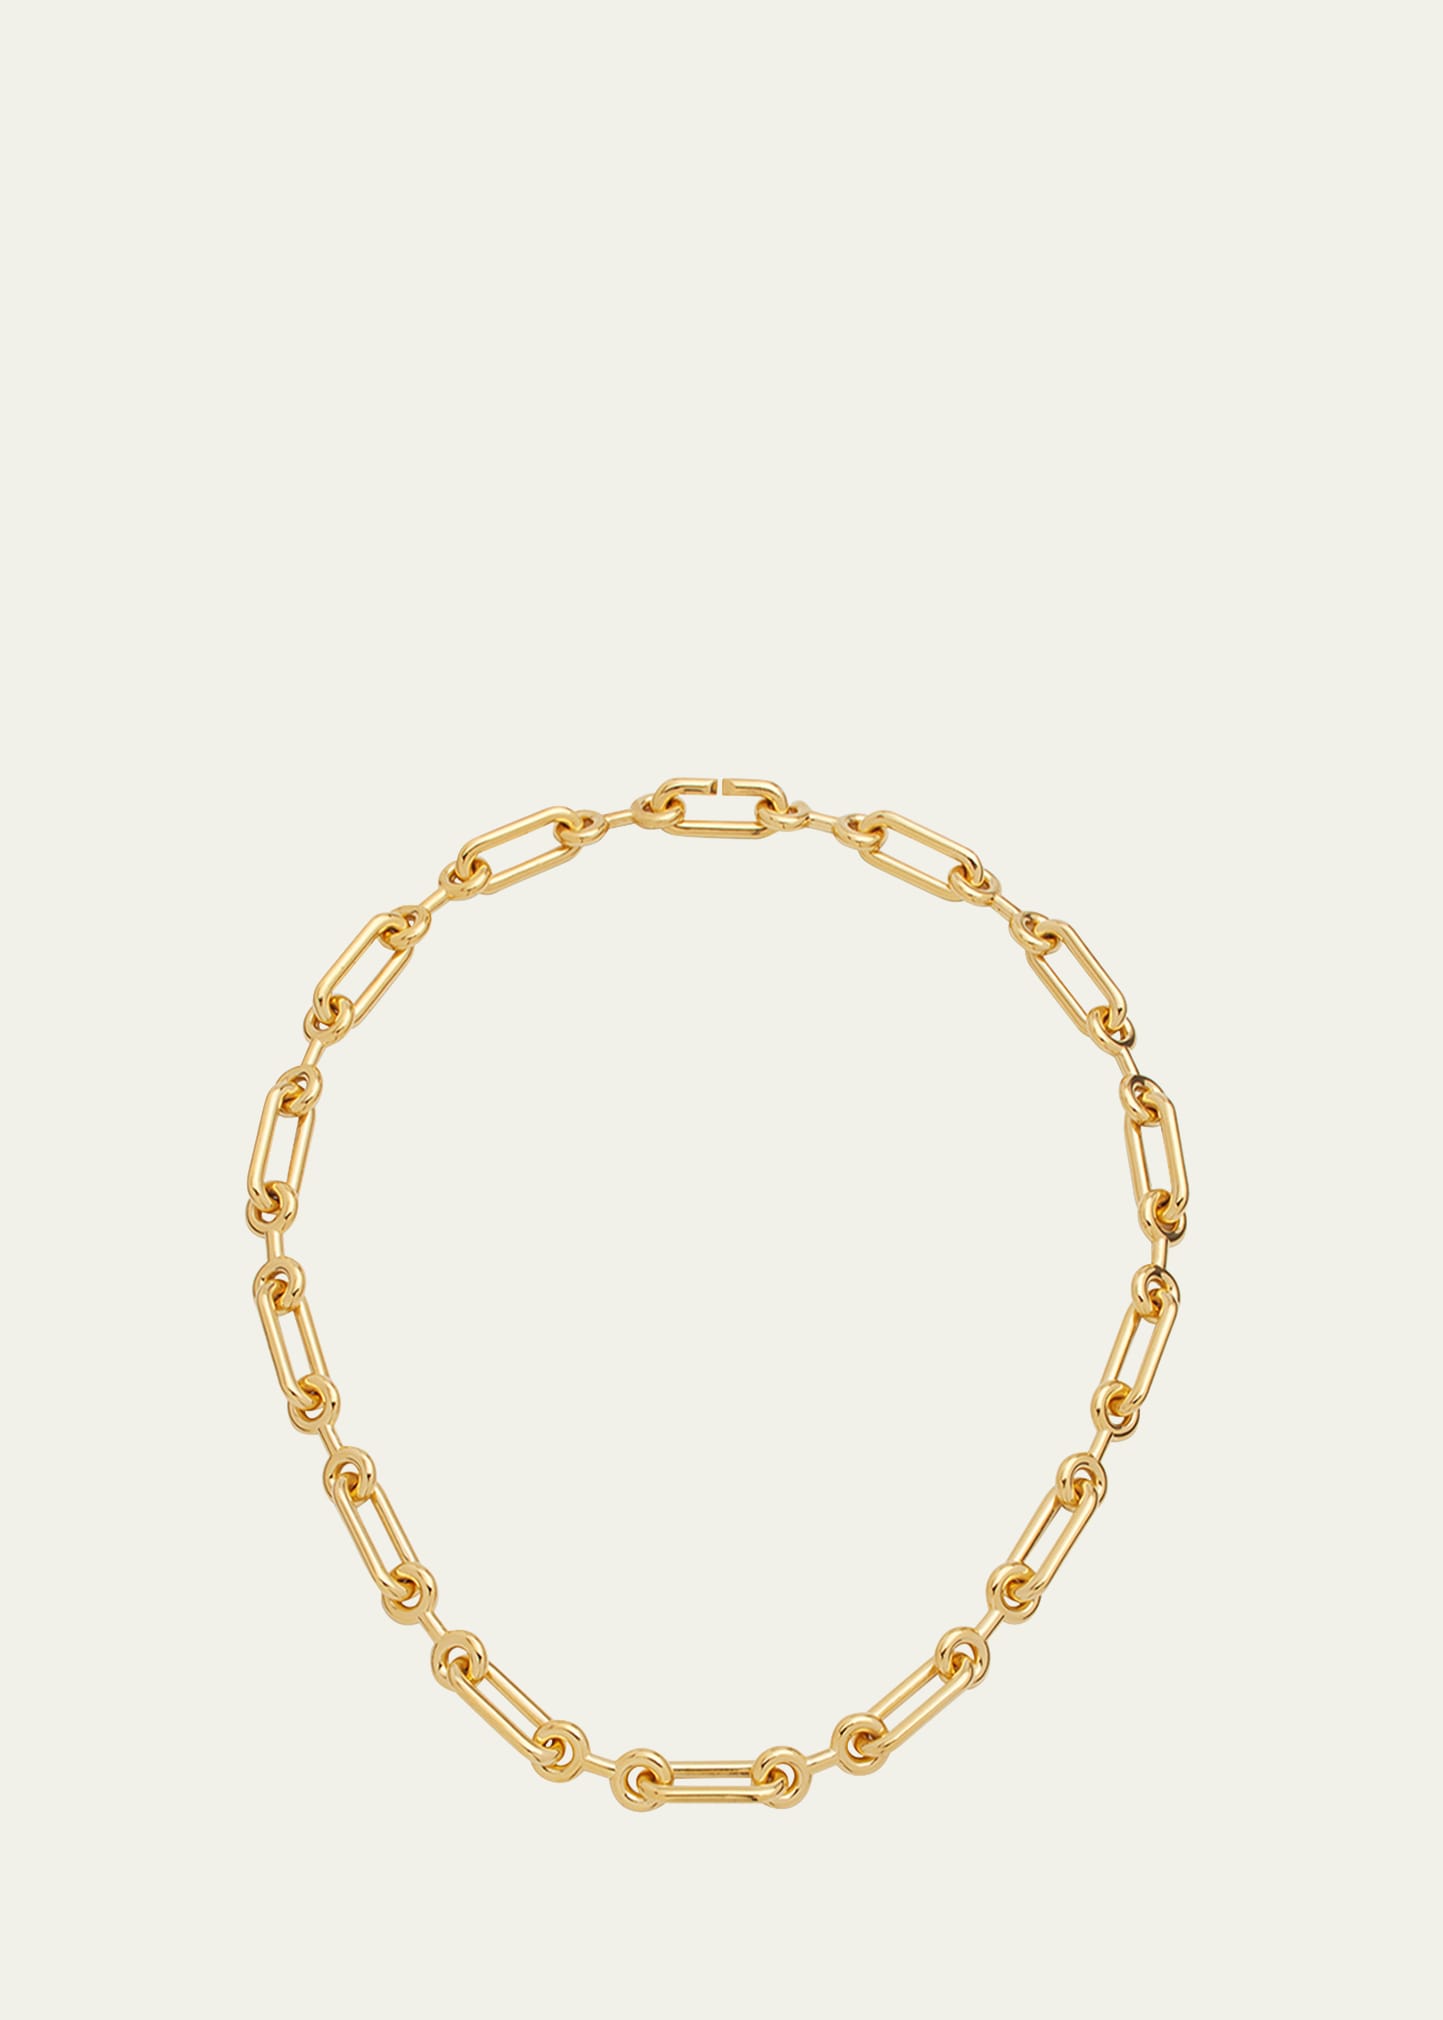 Petite Binary Chain Short Necklace in Gold Vermeil